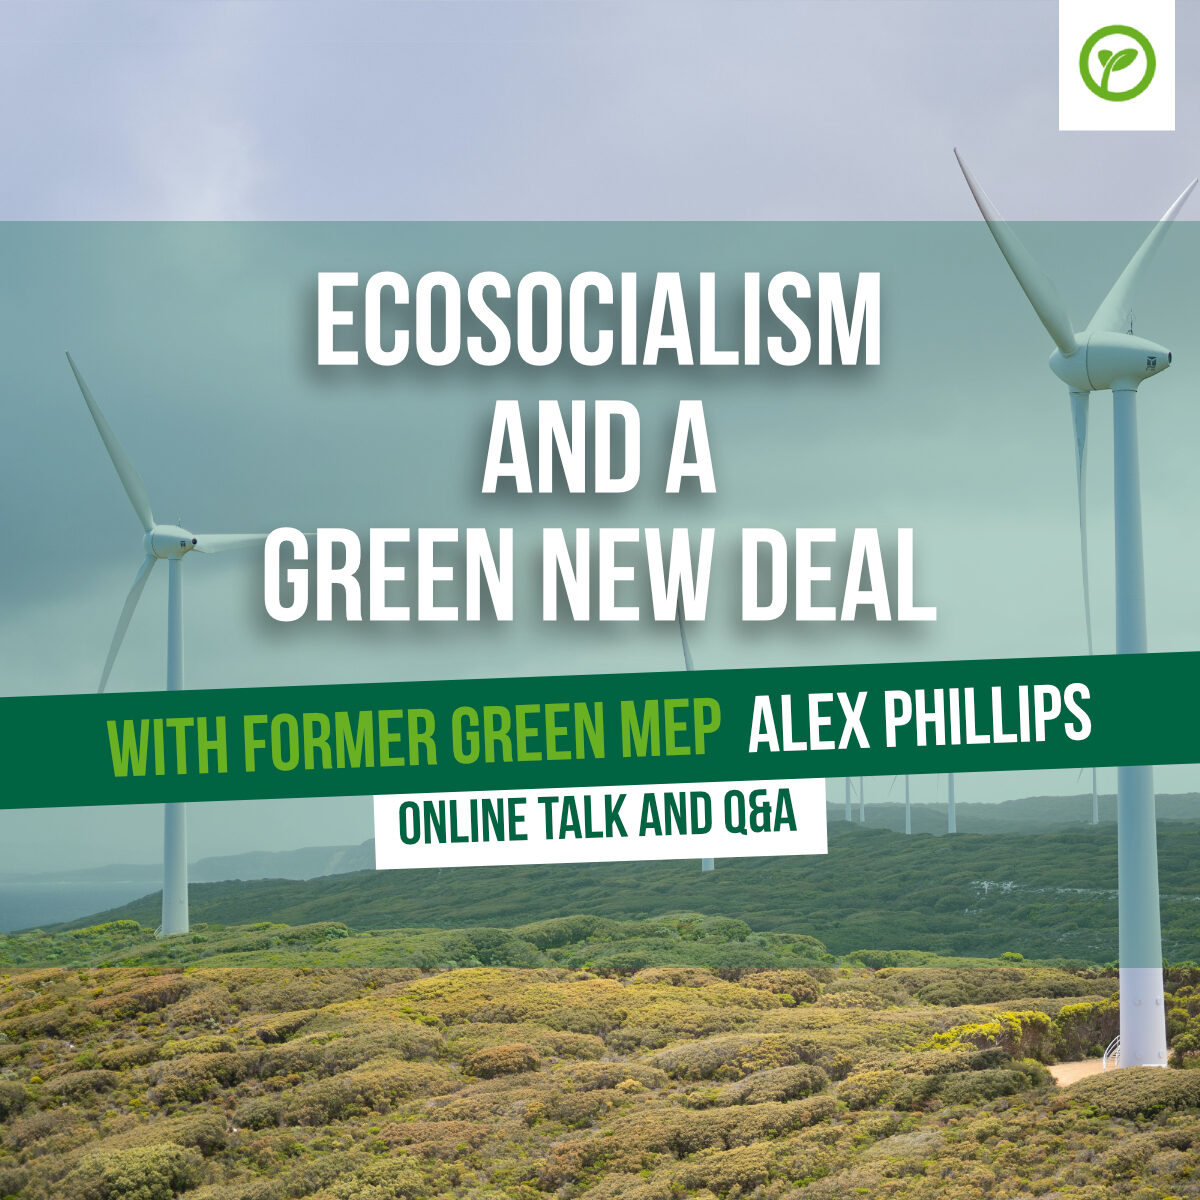 Ecosocialism and a Green New Deal, with former Green MEP Alex Phillips. Online Talk and Q&A.